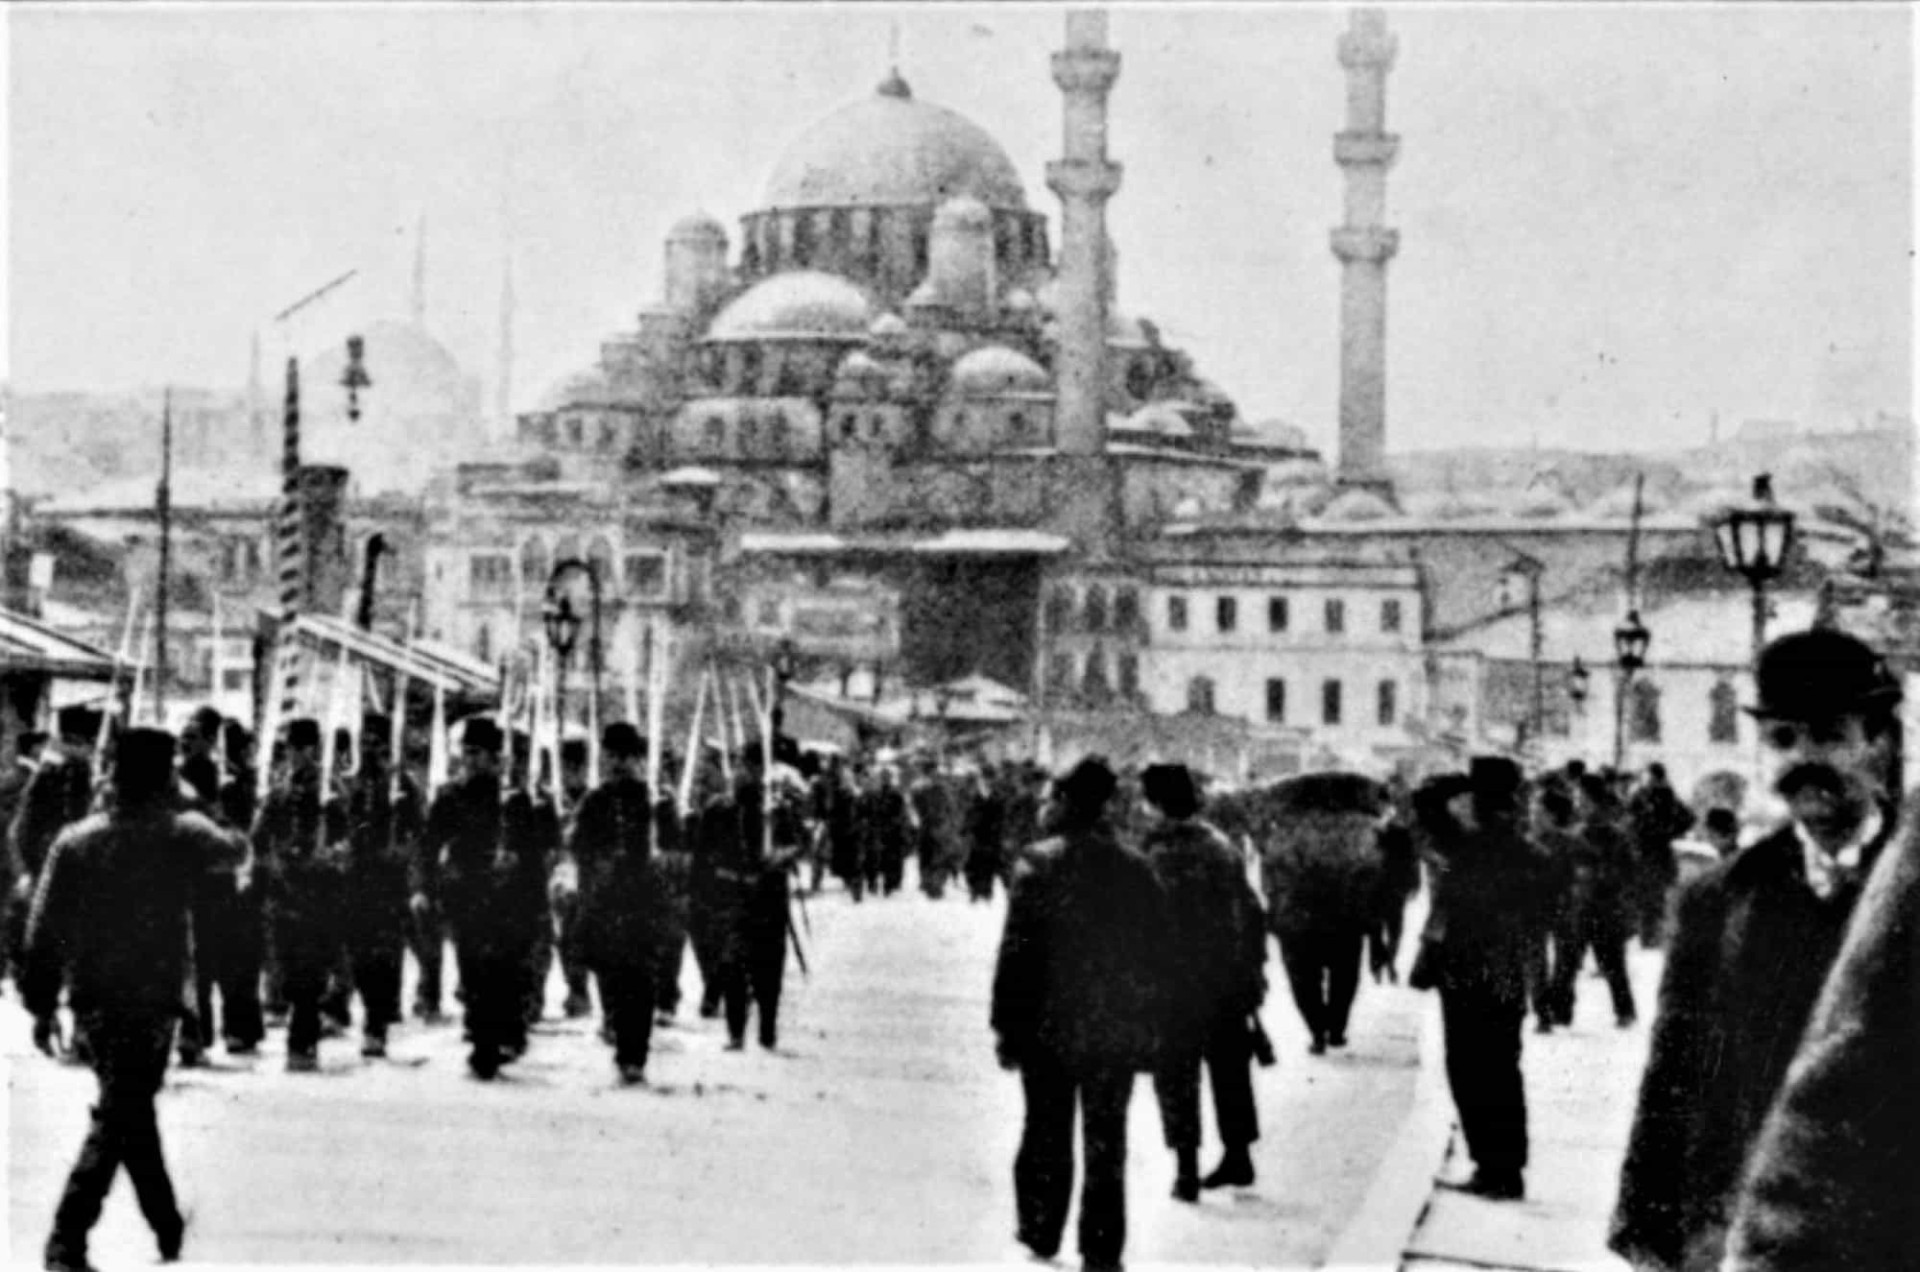 The Turkish super city has had a fiery history. Here's a snap of rebels crossing Galata Bridge, back in 1890, when the city was known as Constantinople.<p>You may also like:<a href="https://www.starsinsider.com/n/405527?utm_source=msn.com&utm_medium=display&utm_campaign=referral_description&utm_content=397441v1en-us"> The fascinating untold life of Viggo Mortensen</a></p>